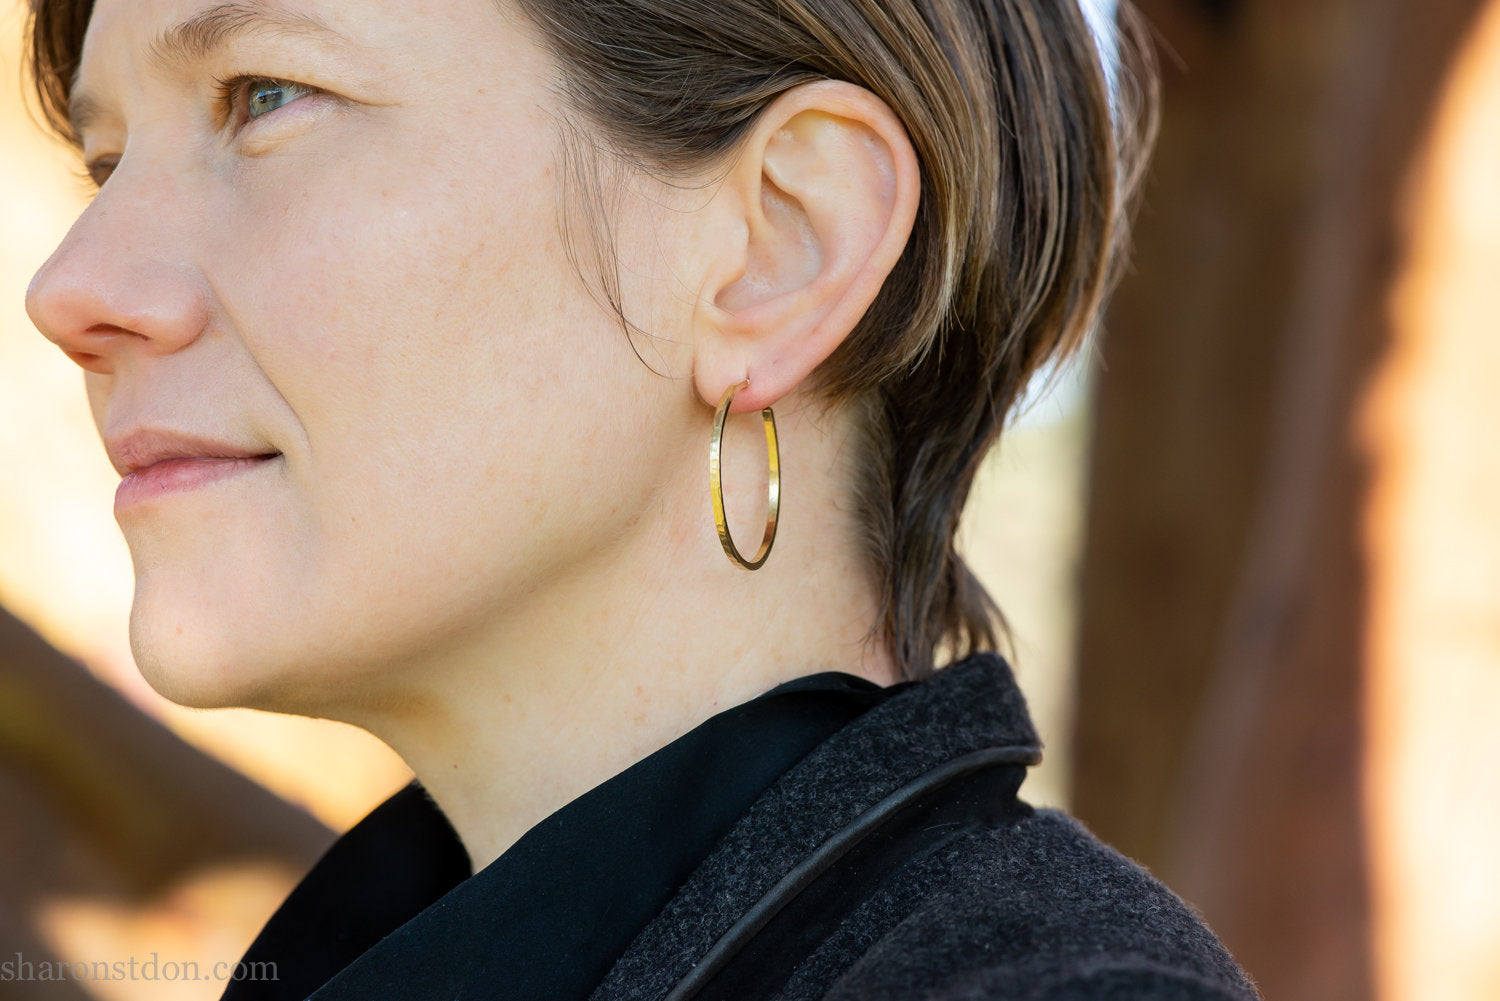 Solid 18k yellow gold hoop earrings set, handmade in North America by Sharon SaintDon.30mm diameter round, 2mm wide, 1.5mm thick, with hammered texture and matte finish.